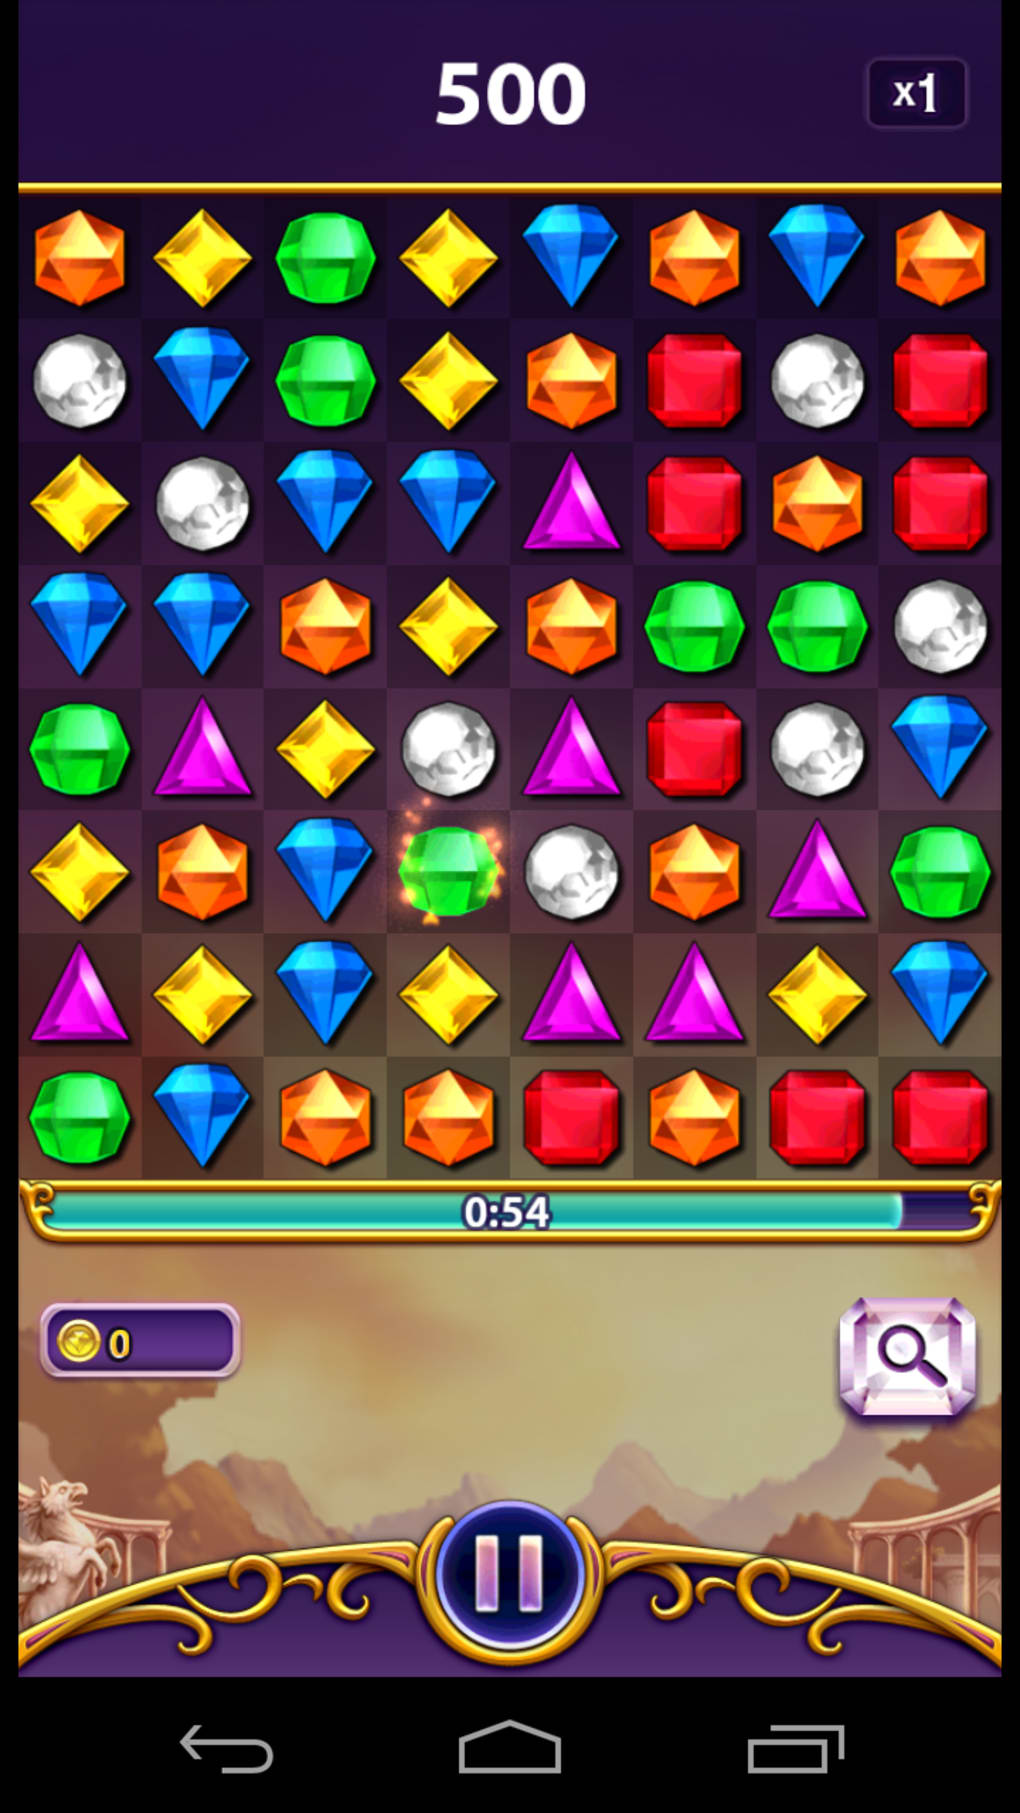 bejeweled blitz 2 play online